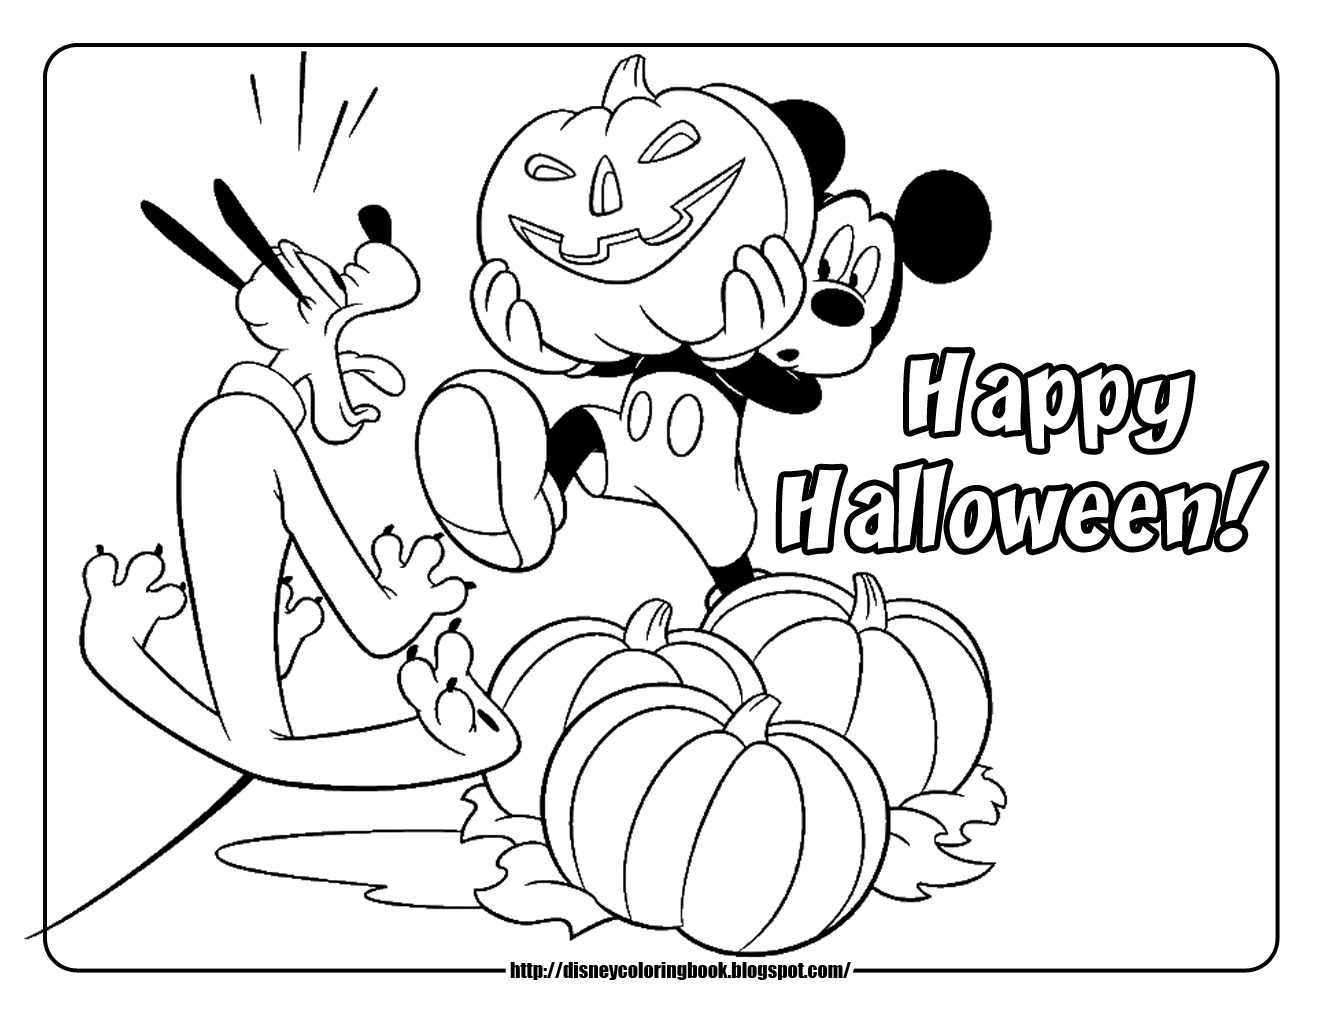 kaboose coloring pages halloween mickey - photo #43